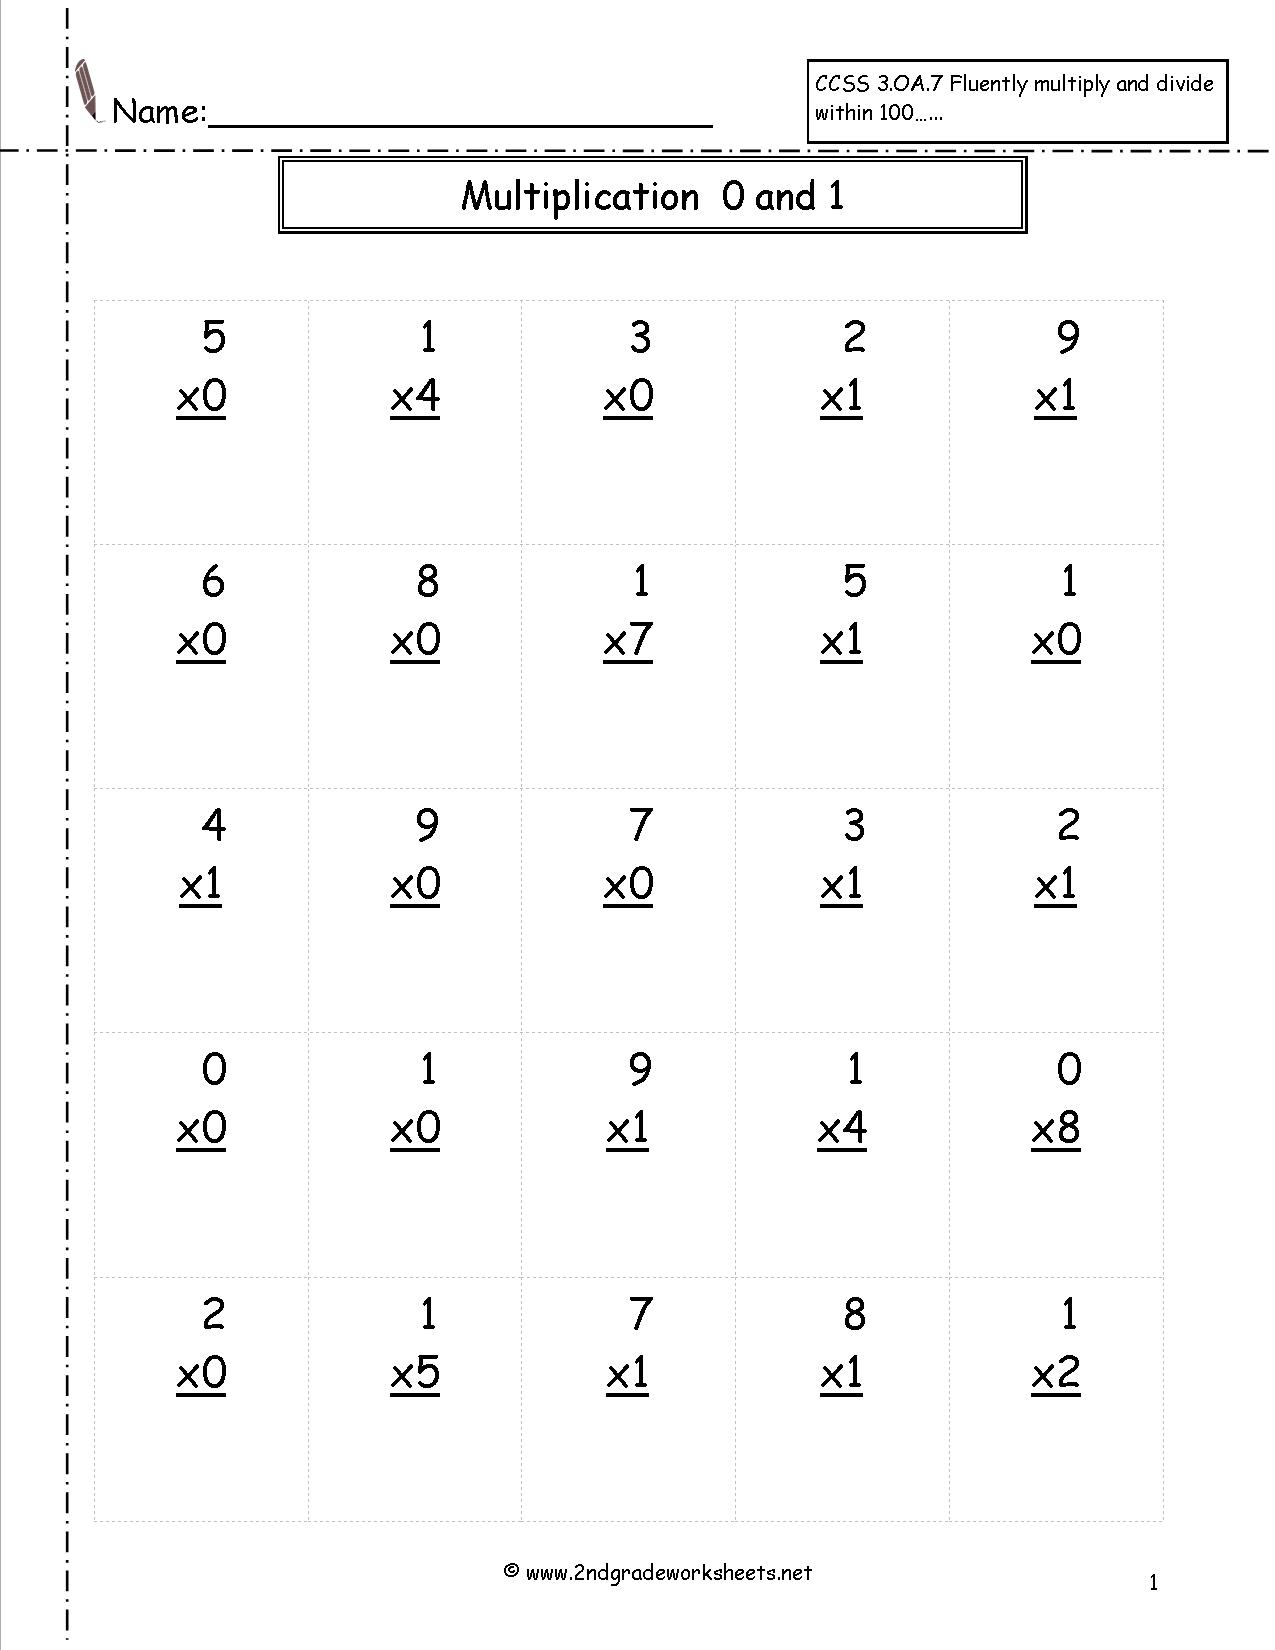 Multiplication Worksheets And Printouts within Printable Multiplication Sheets Free